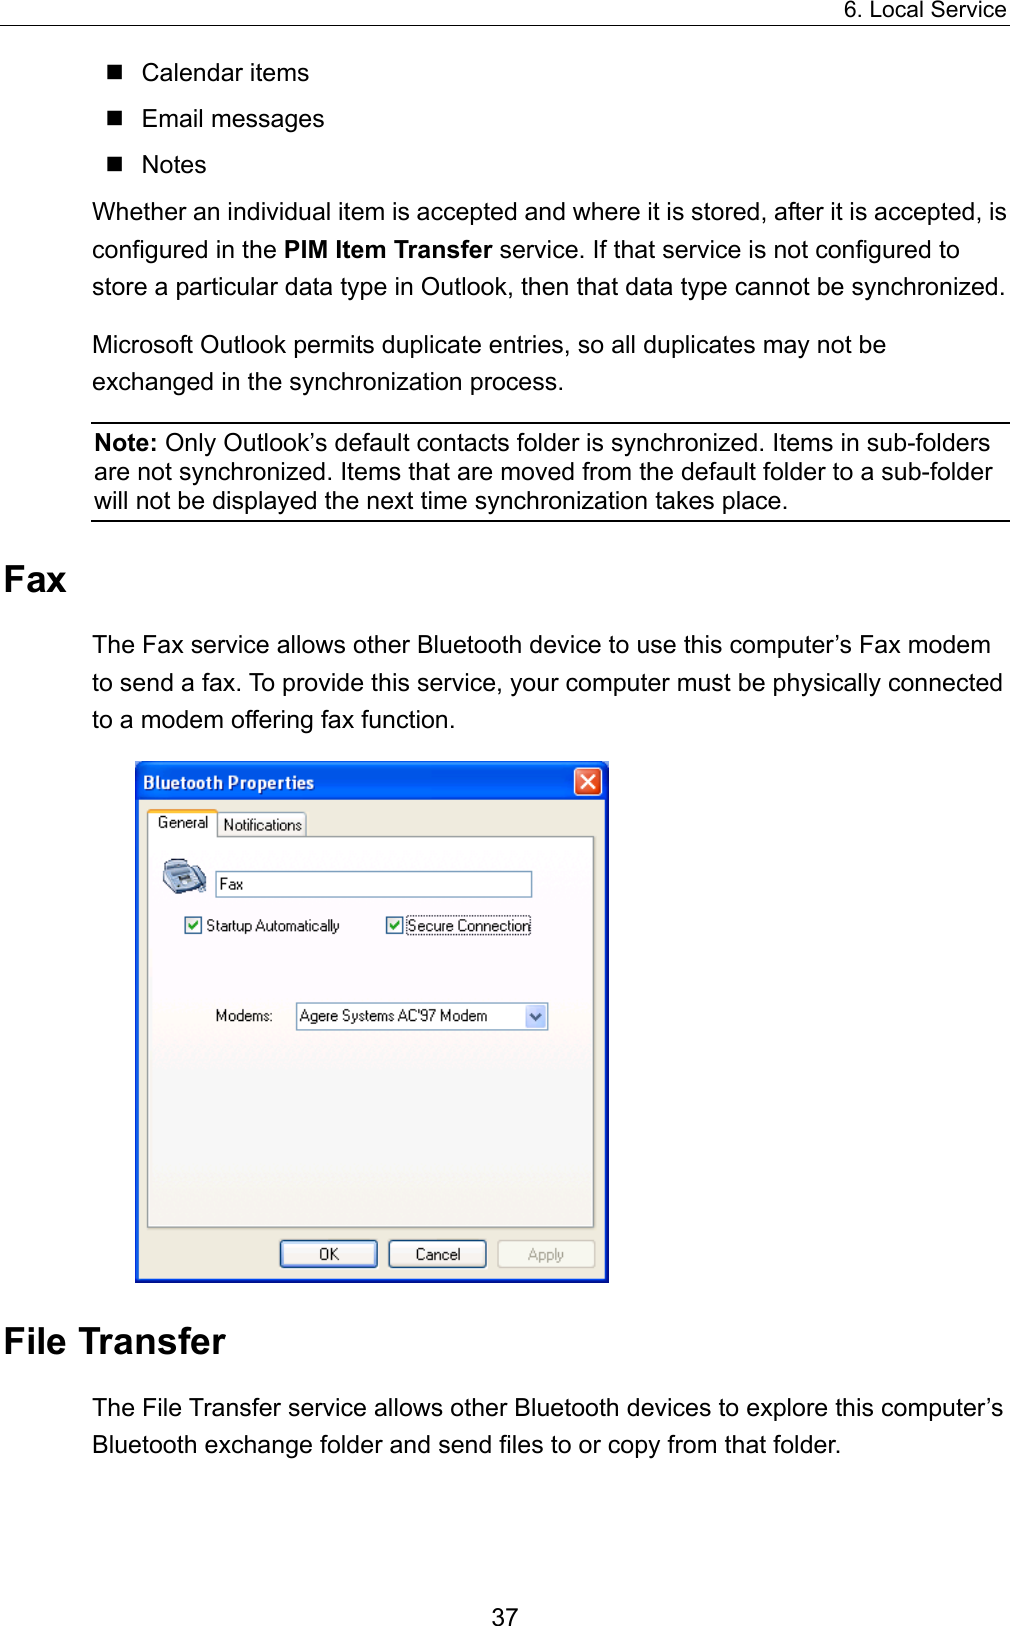 6. Local Service 37  Calendar items  Email messages  Notes Whether an individual item is accepted and where it is stored, after it is accepted, is configured in the PIM Item Transfer service. If that service is not configured to store a particular data type in Outlook, then that data type cannot be synchronized. Microsoft Outlook permits duplicate entries, so all duplicates may not be exchanged in the synchronization process. Note: Only Outlook’s default contacts folder is synchronized. Items in sub-folders are not synchronized. Items that are moved from the default folder to a sub-folder will not be displayed the next time synchronization takes place. Fax The Fax service allows other Bluetooth device to use this computer’s Fax modem to send a fax. To provide this service, your computer must be physically connected to a modem offering fax function.    File Transfer The File Transfer service allows other Bluetooth devices to explore this computer’s Bluetooth exchange folder and send files to or copy from that folder.   